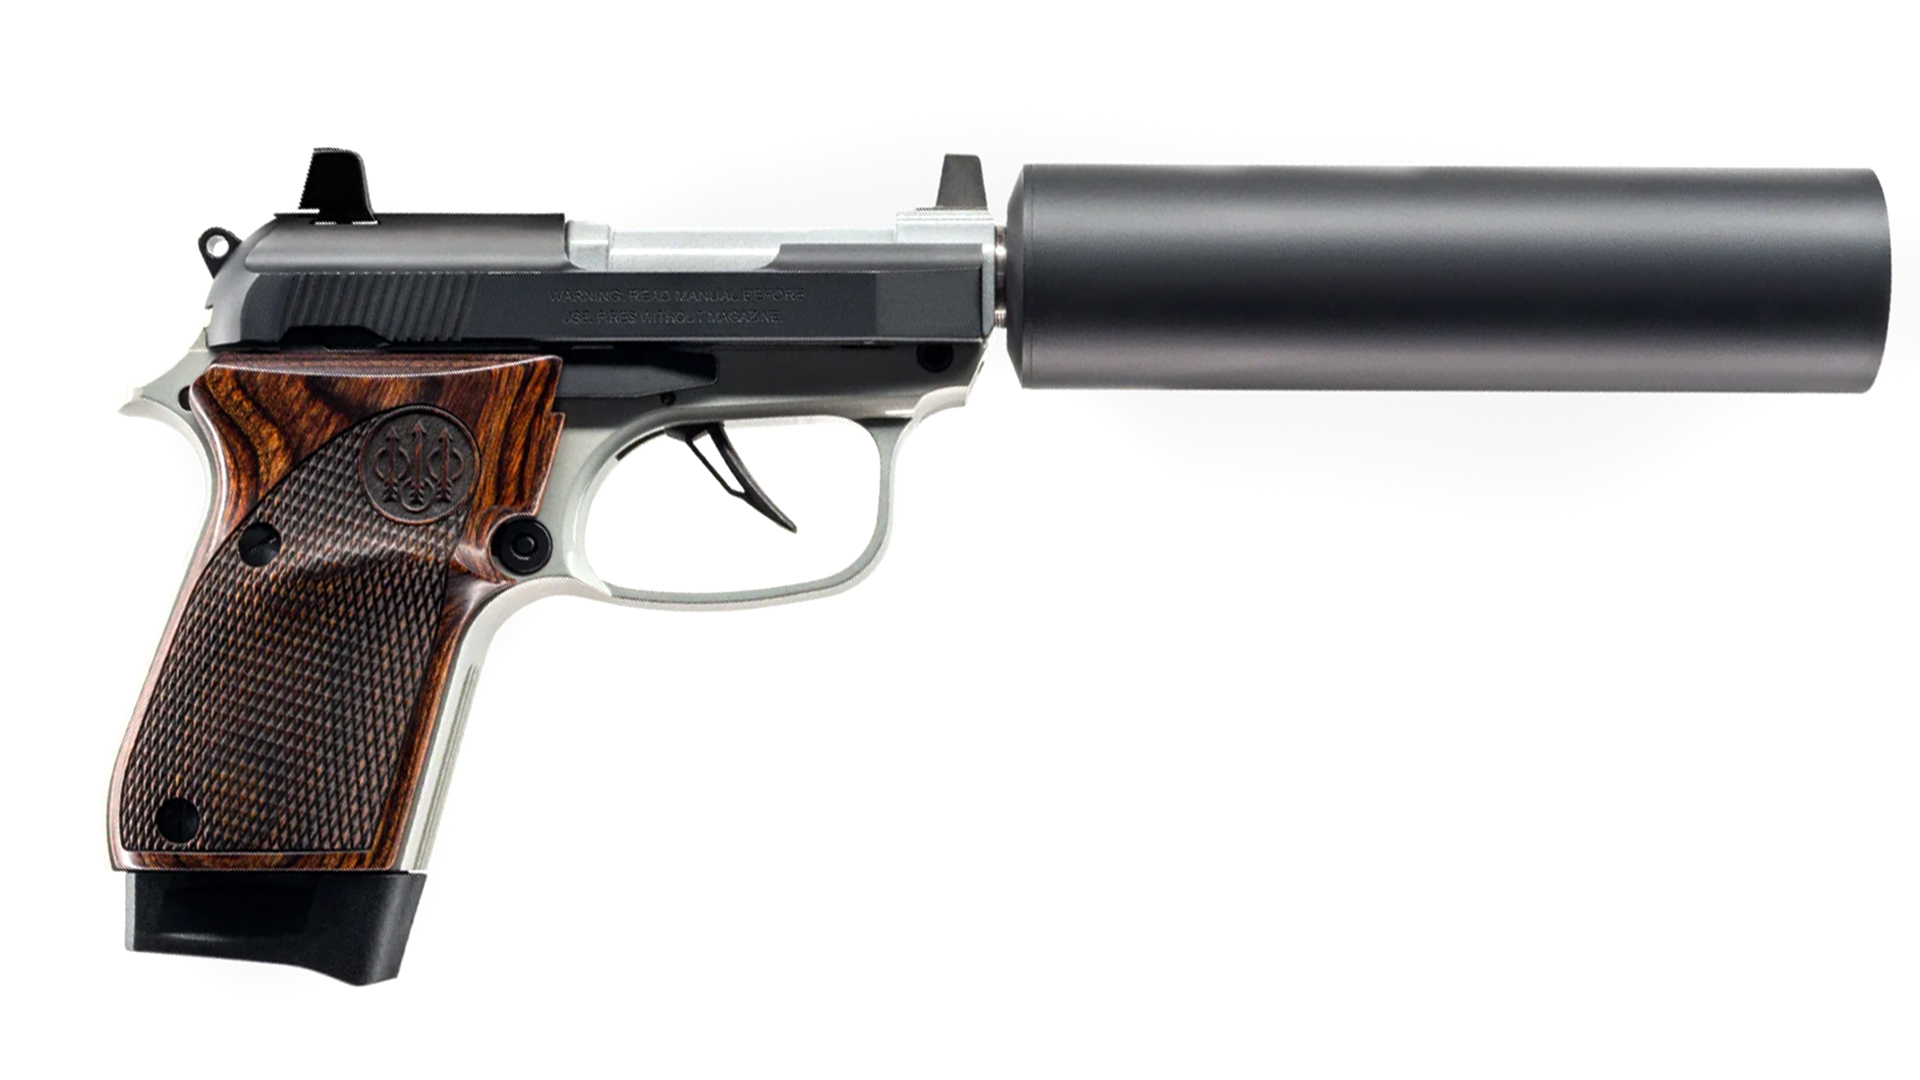 The "Get Home" version of the Beretta 30X pistol with a suppressor attached.